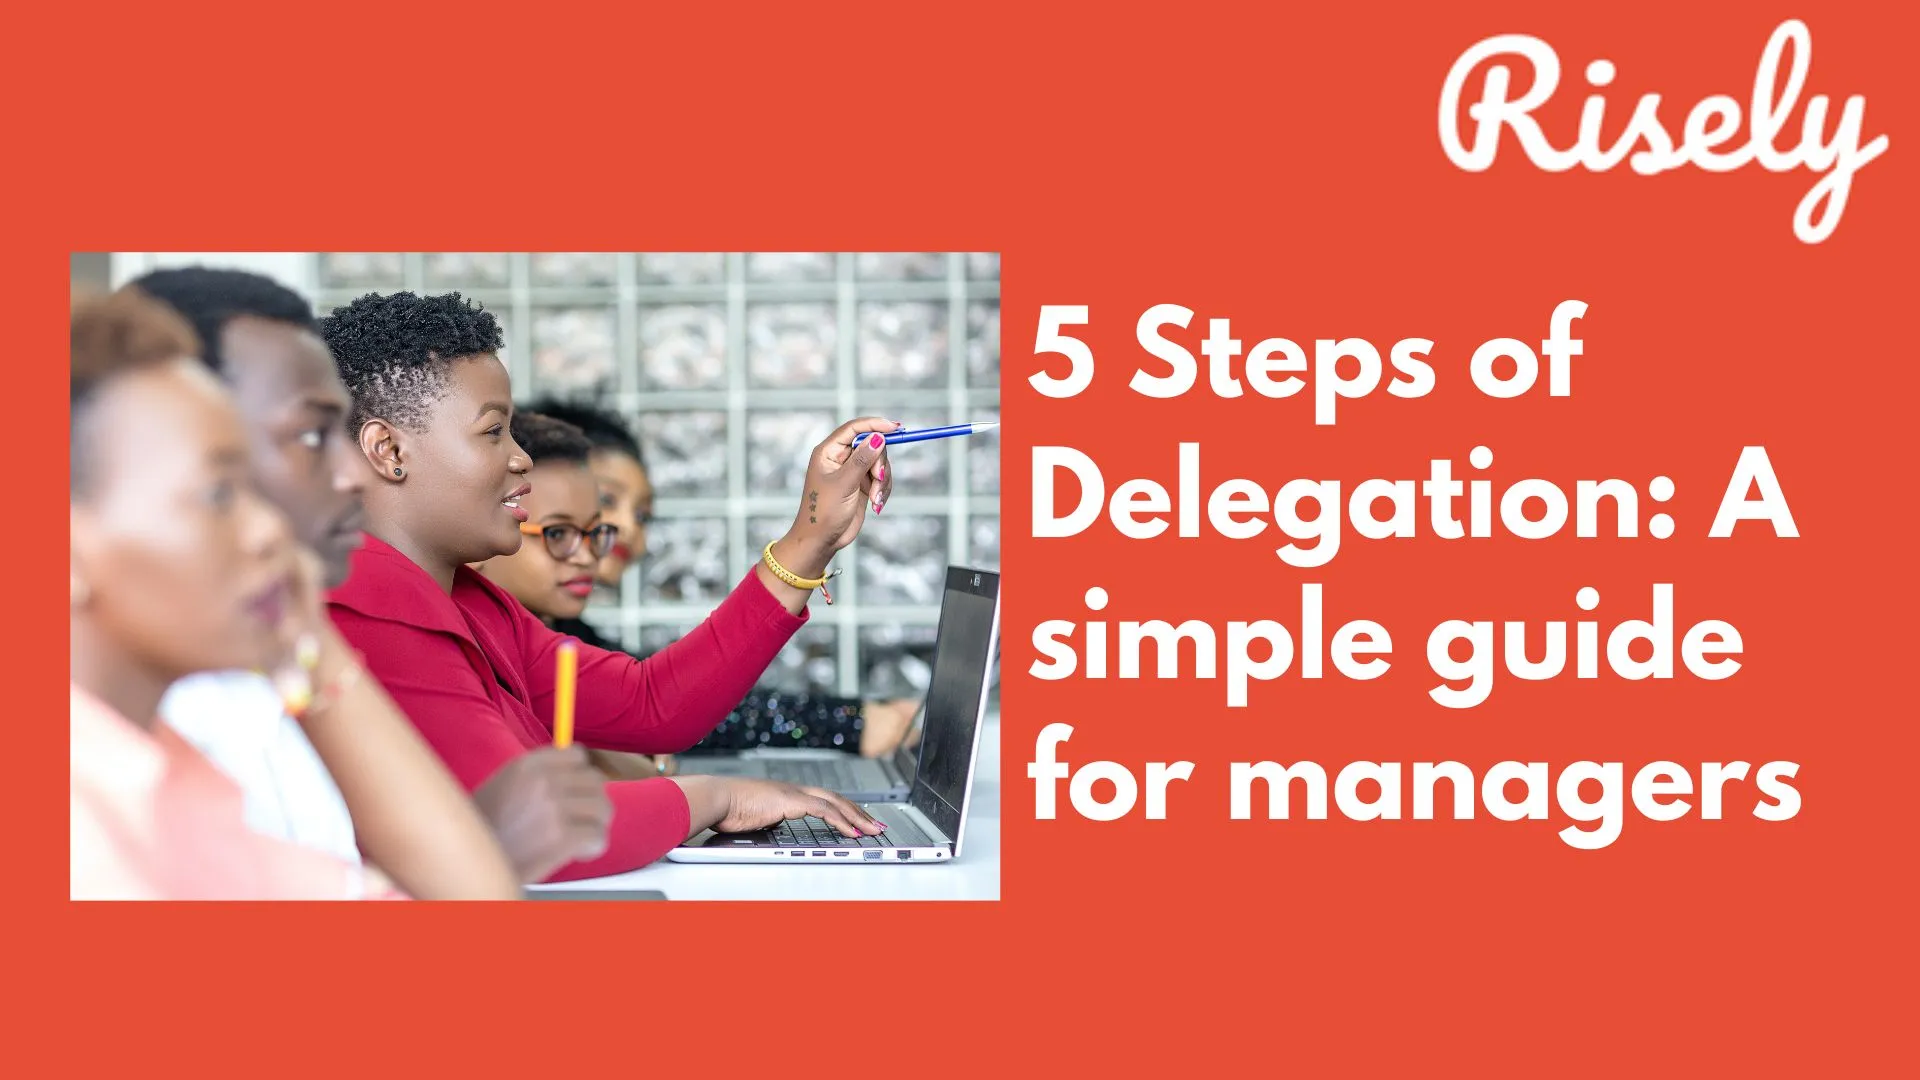 5 Steps of Delegation: A simple guide for managers